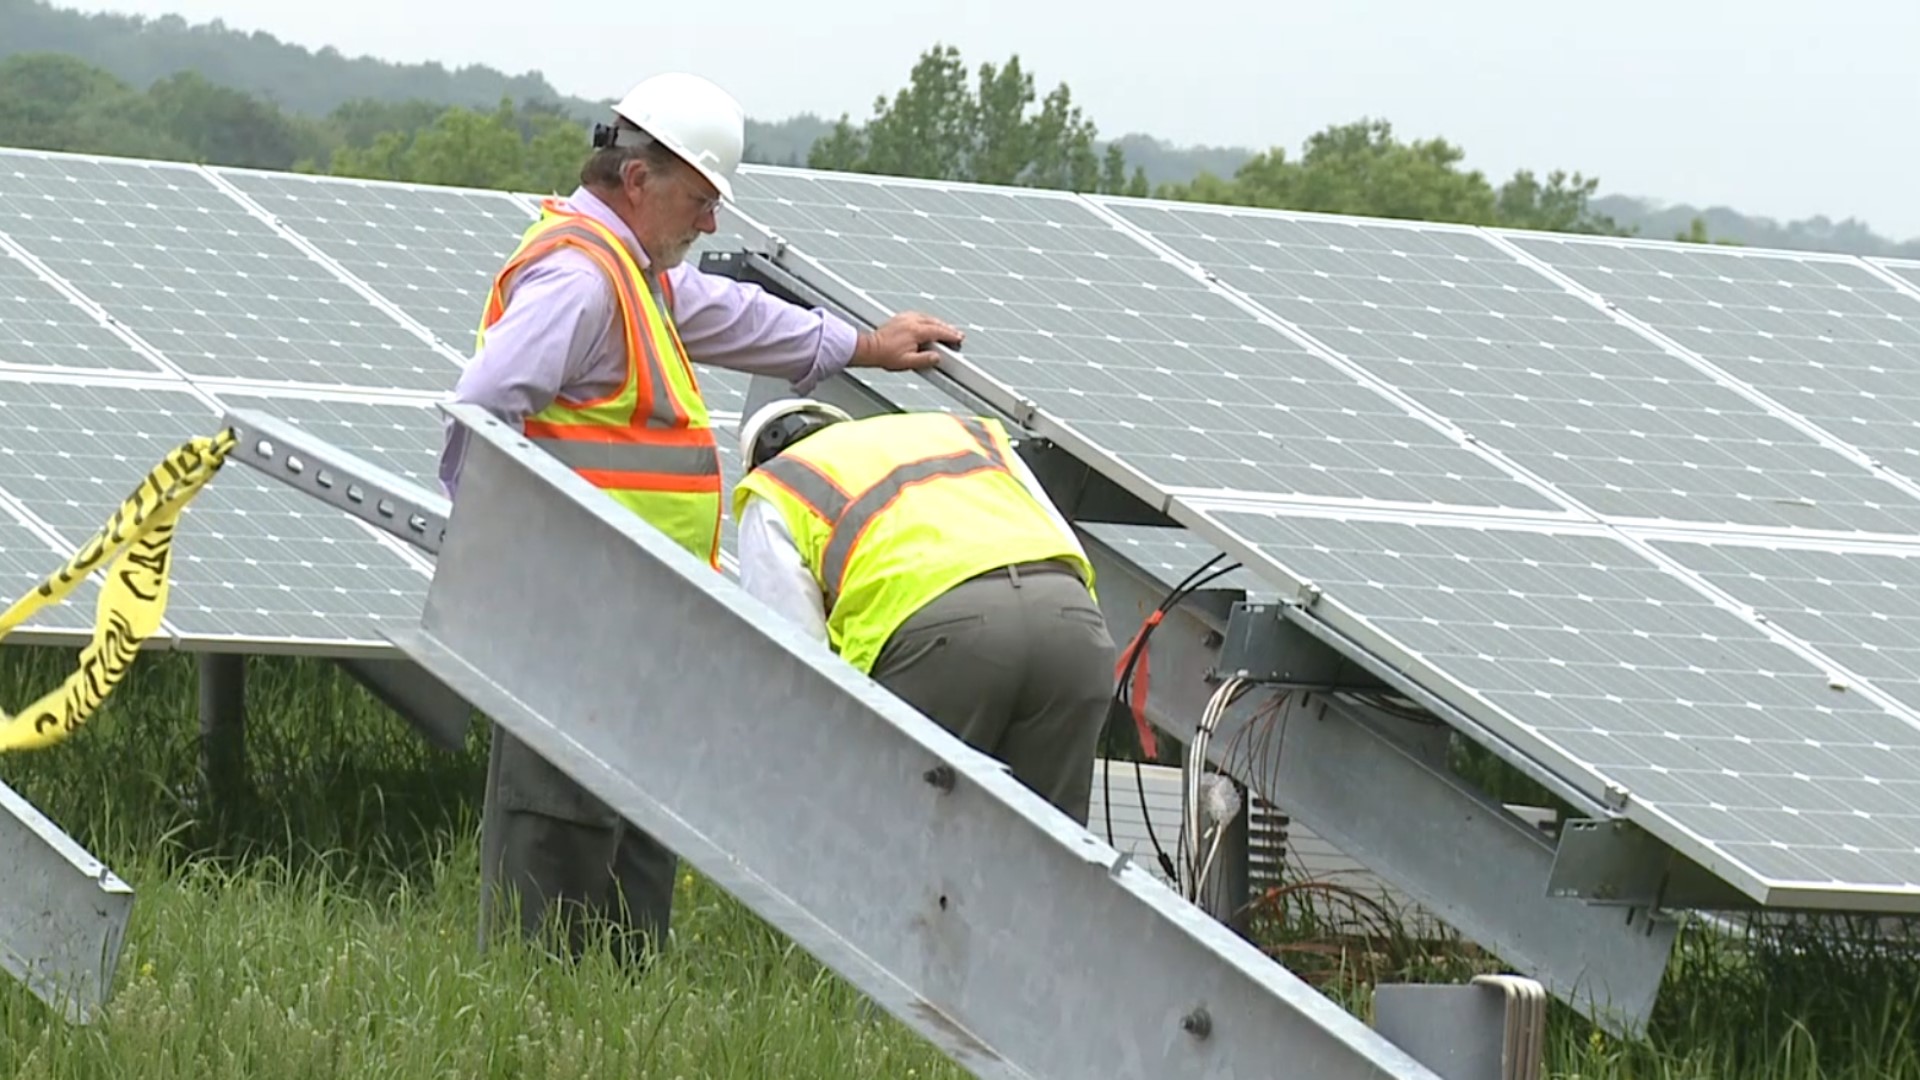 The proposed solar farm would produce enough clean electricity to provide power to 12,000 Pennsylvania homes, according to Enel, the company behind the project.